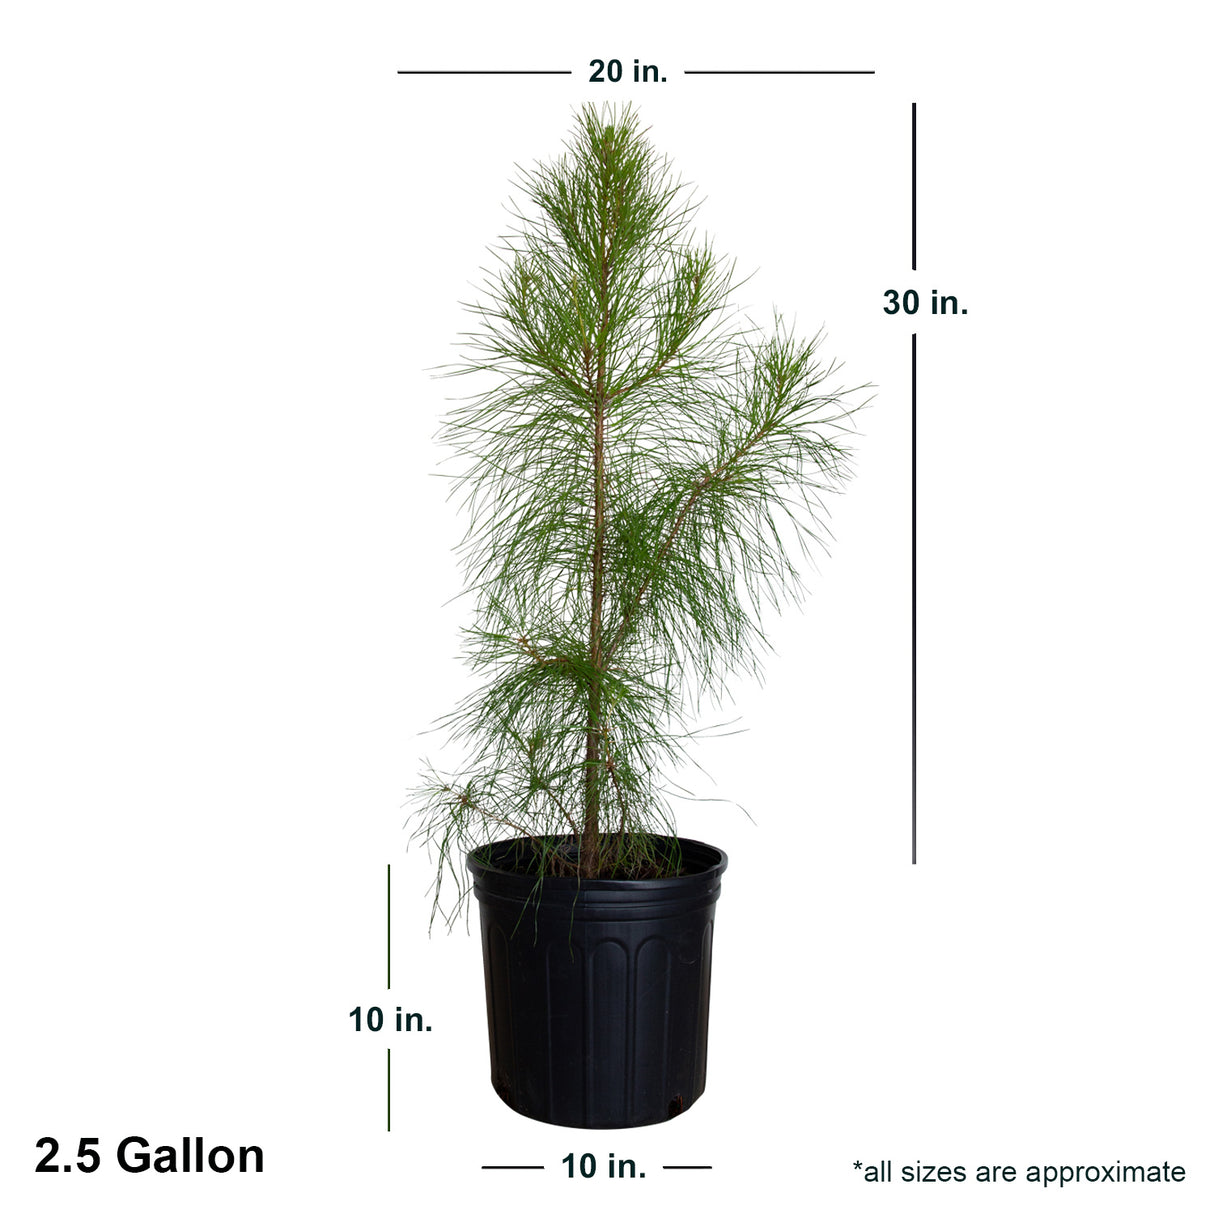 2.4 Gallon Pine Loblolly in black container showing dimensions.